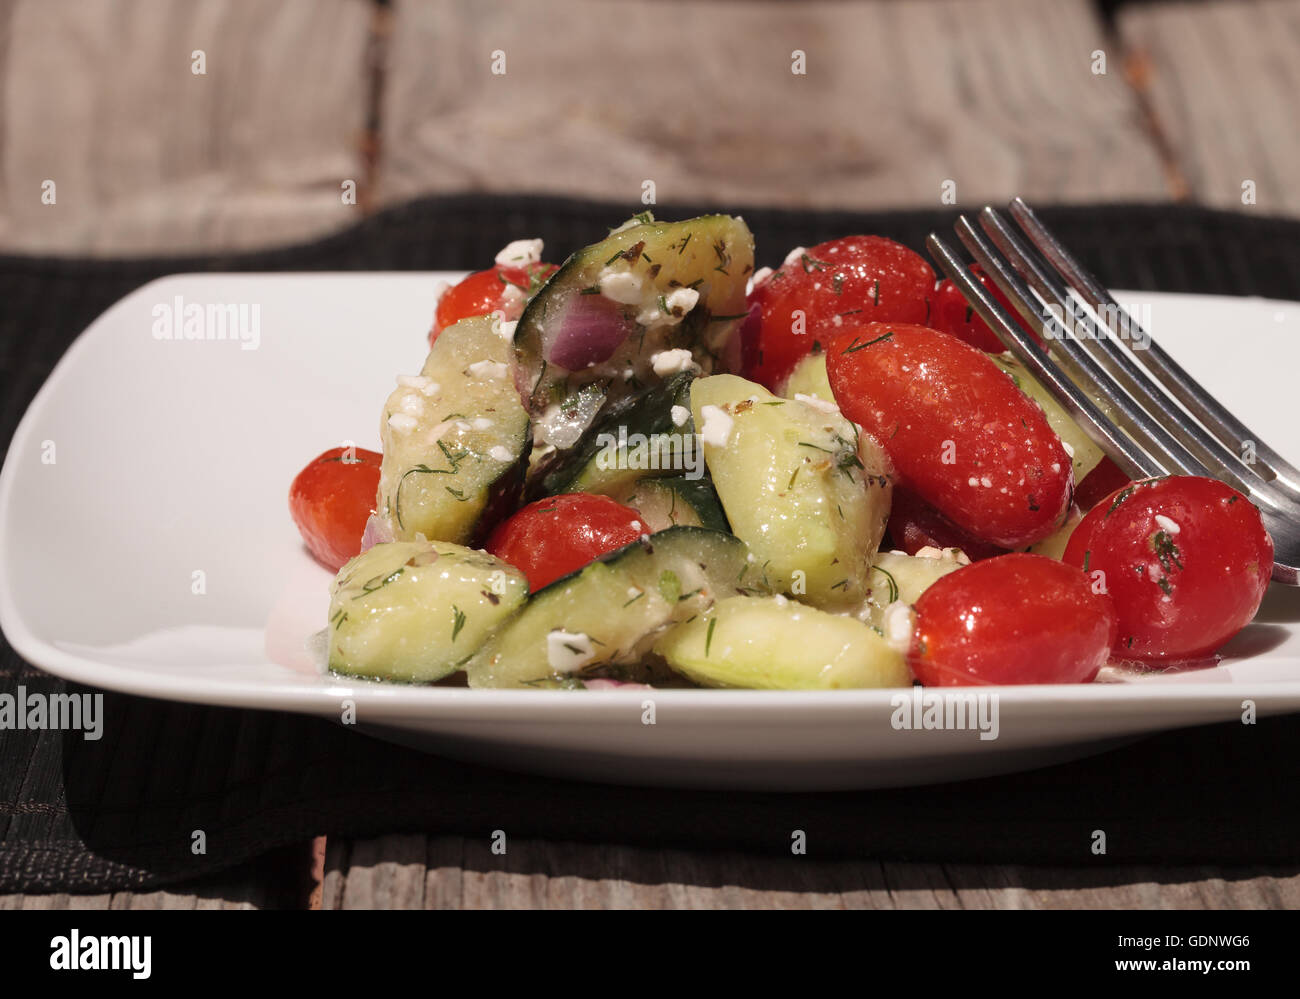 Cucumber, tomato, feta cheese and dill salad with a vinaigrette dressing on a white plate with a fork at mealtime. Stock Photo